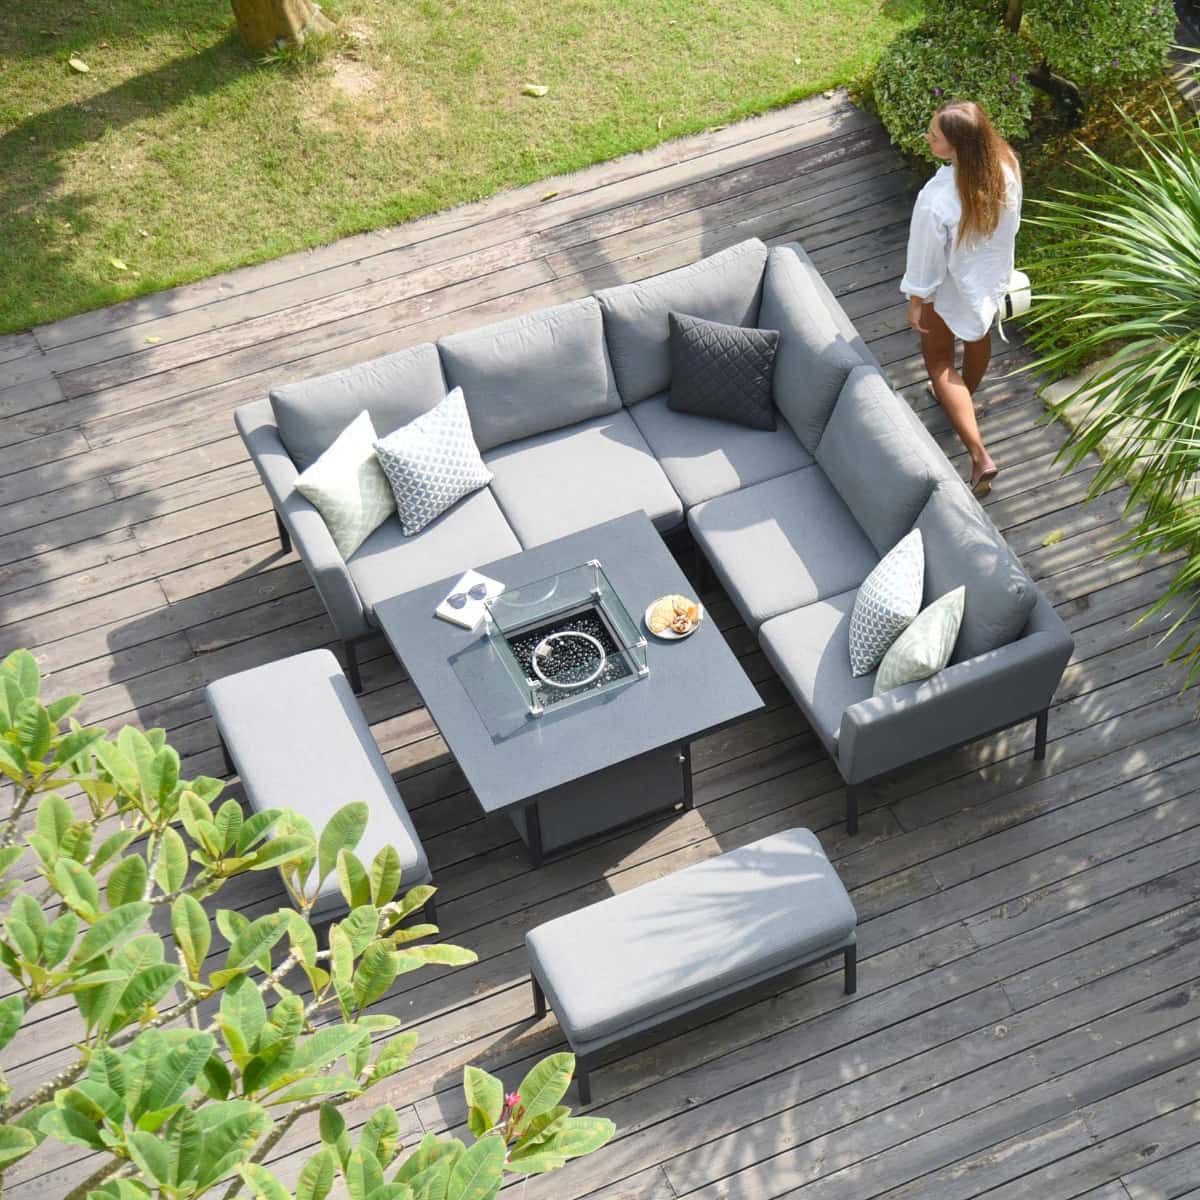 Fabric corner sofa dining set with square fire pit table #colour_flanelle